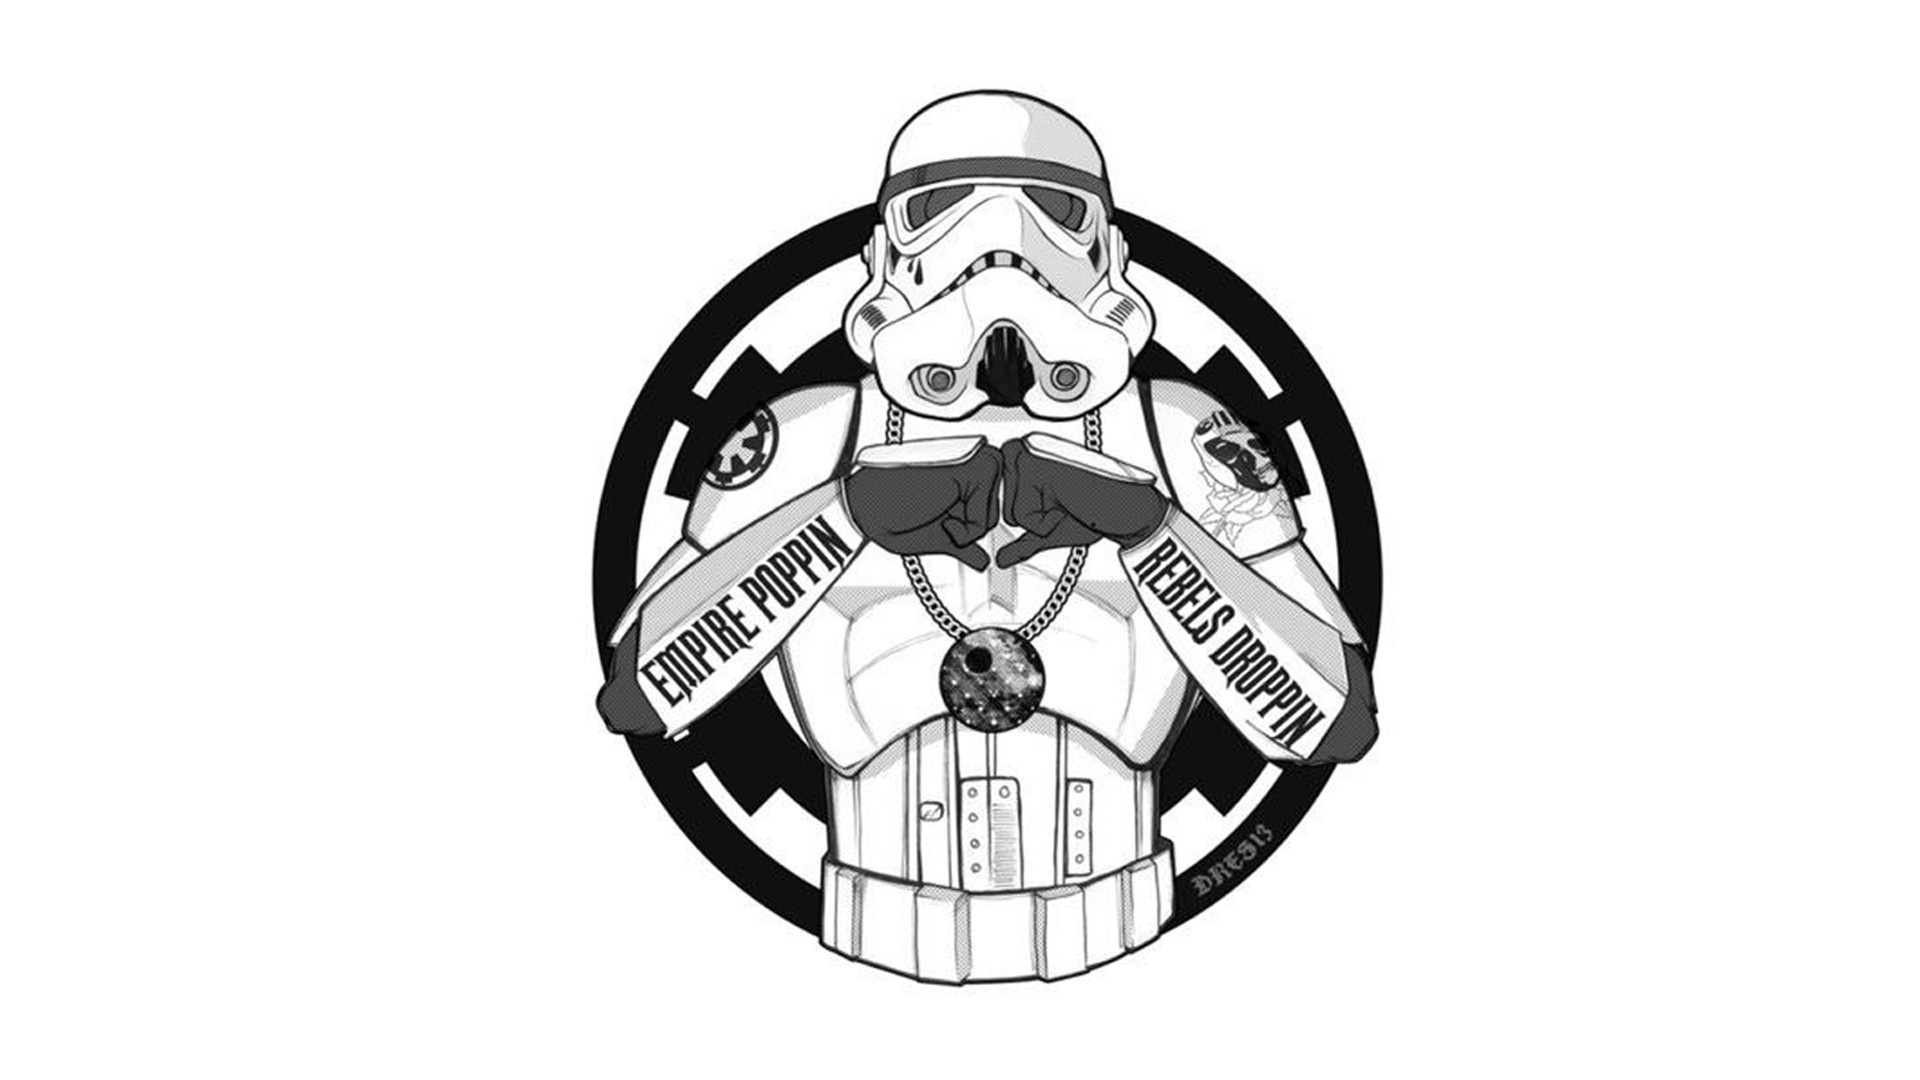 General 1920x1080 Star Wars stormtrooper Star Wars Humor monochrome upscaled Imperial Stormtrooper white background simple background